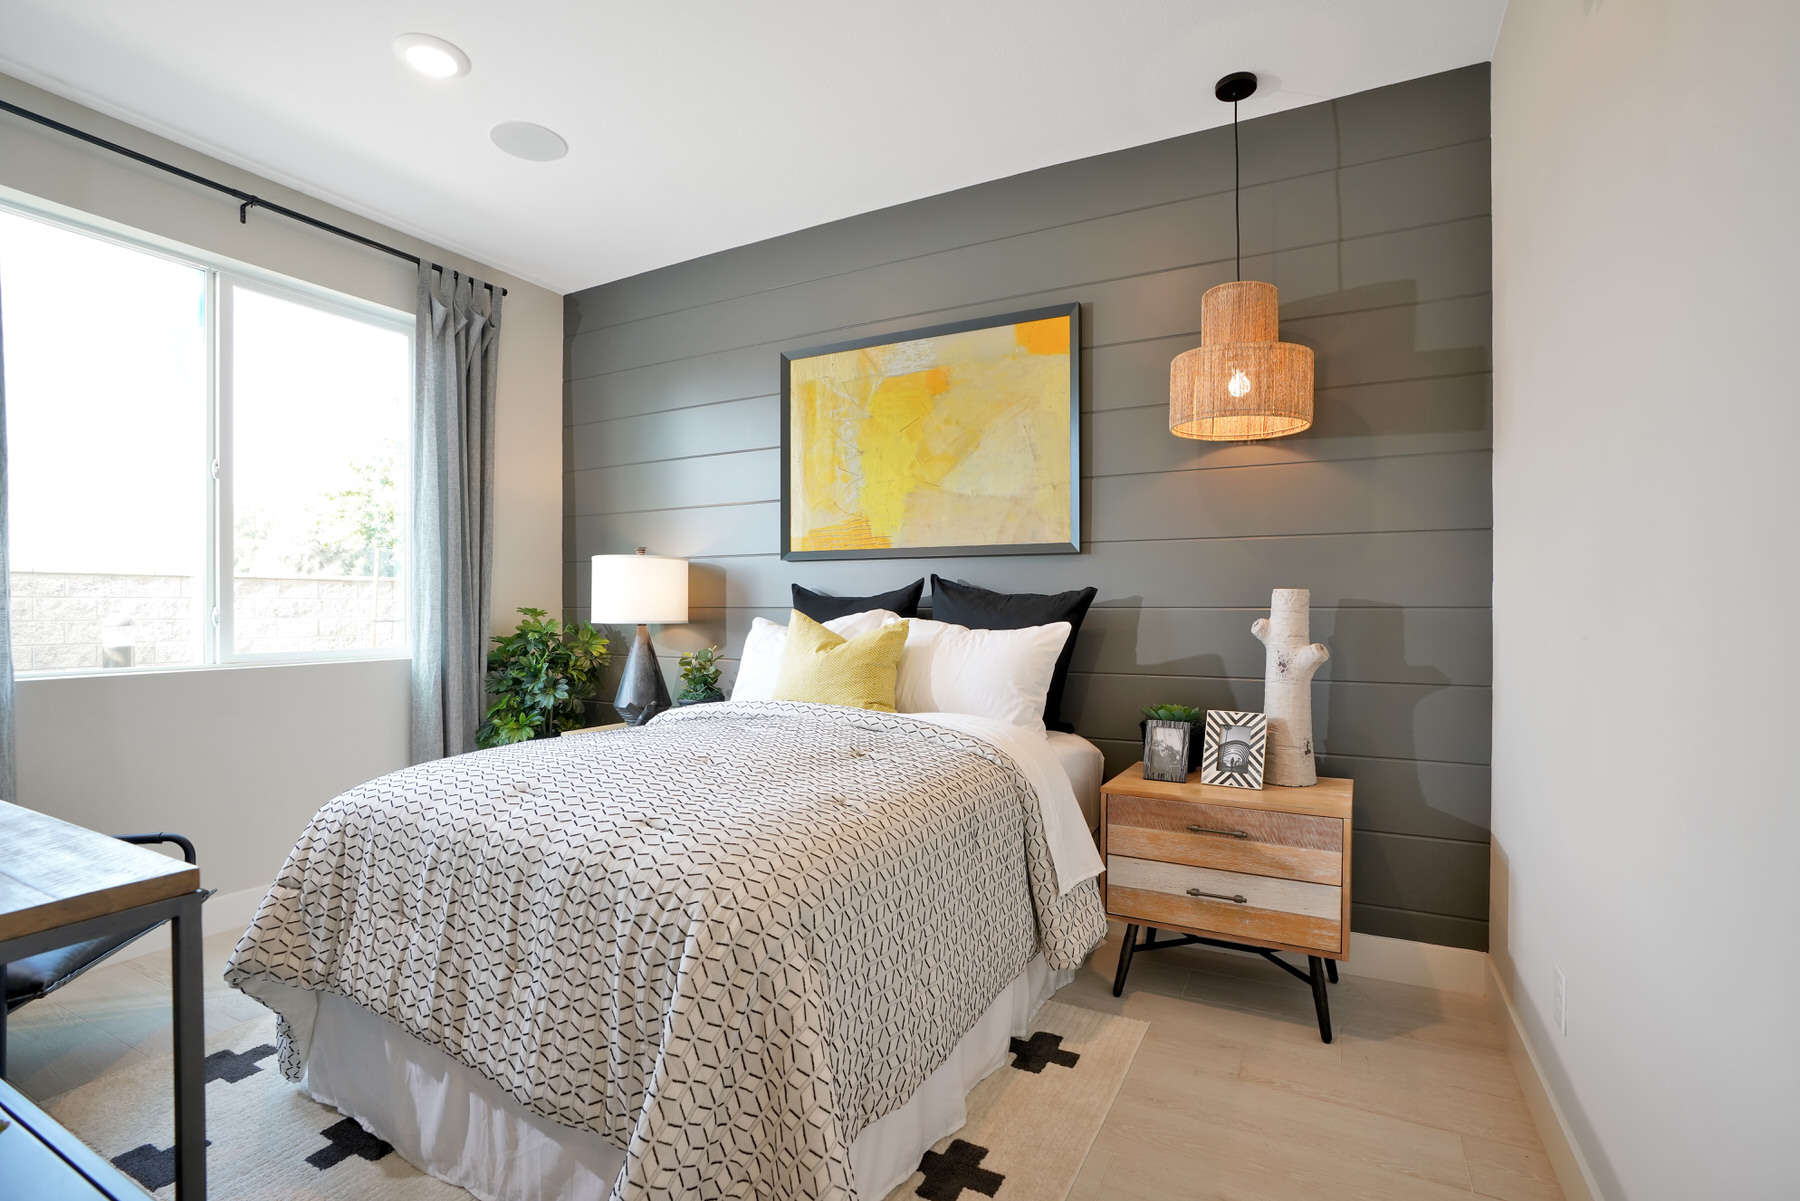 Bedroom 4 in Plan 3A at Townes at Magnolia by Melia Homes in Anaheim, CA